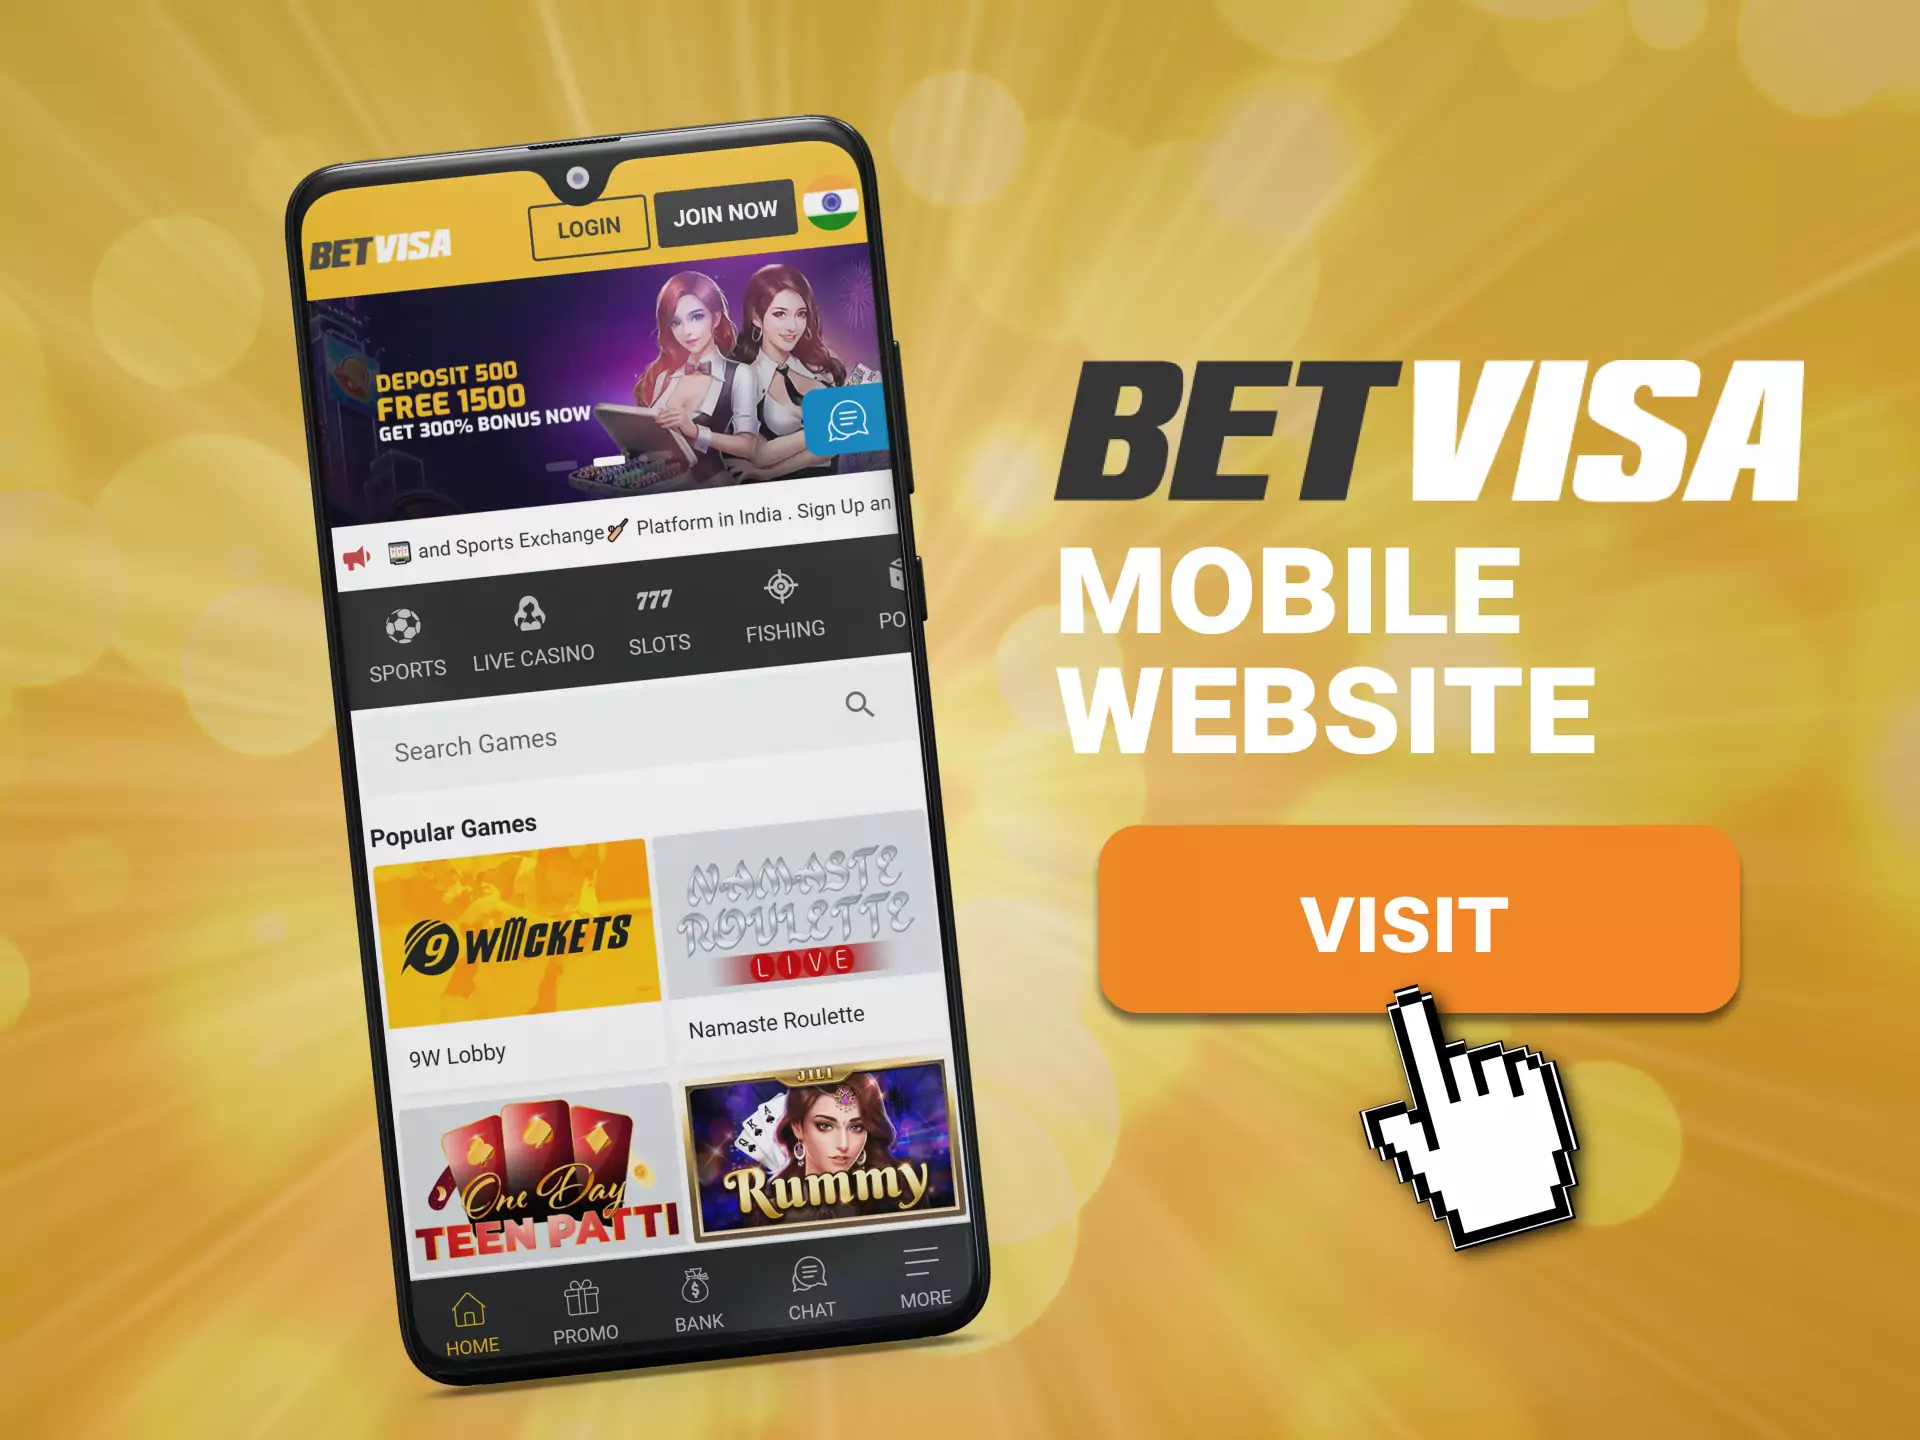 Besides apps, you can use the mobile website of Betvisa from your smartphone.